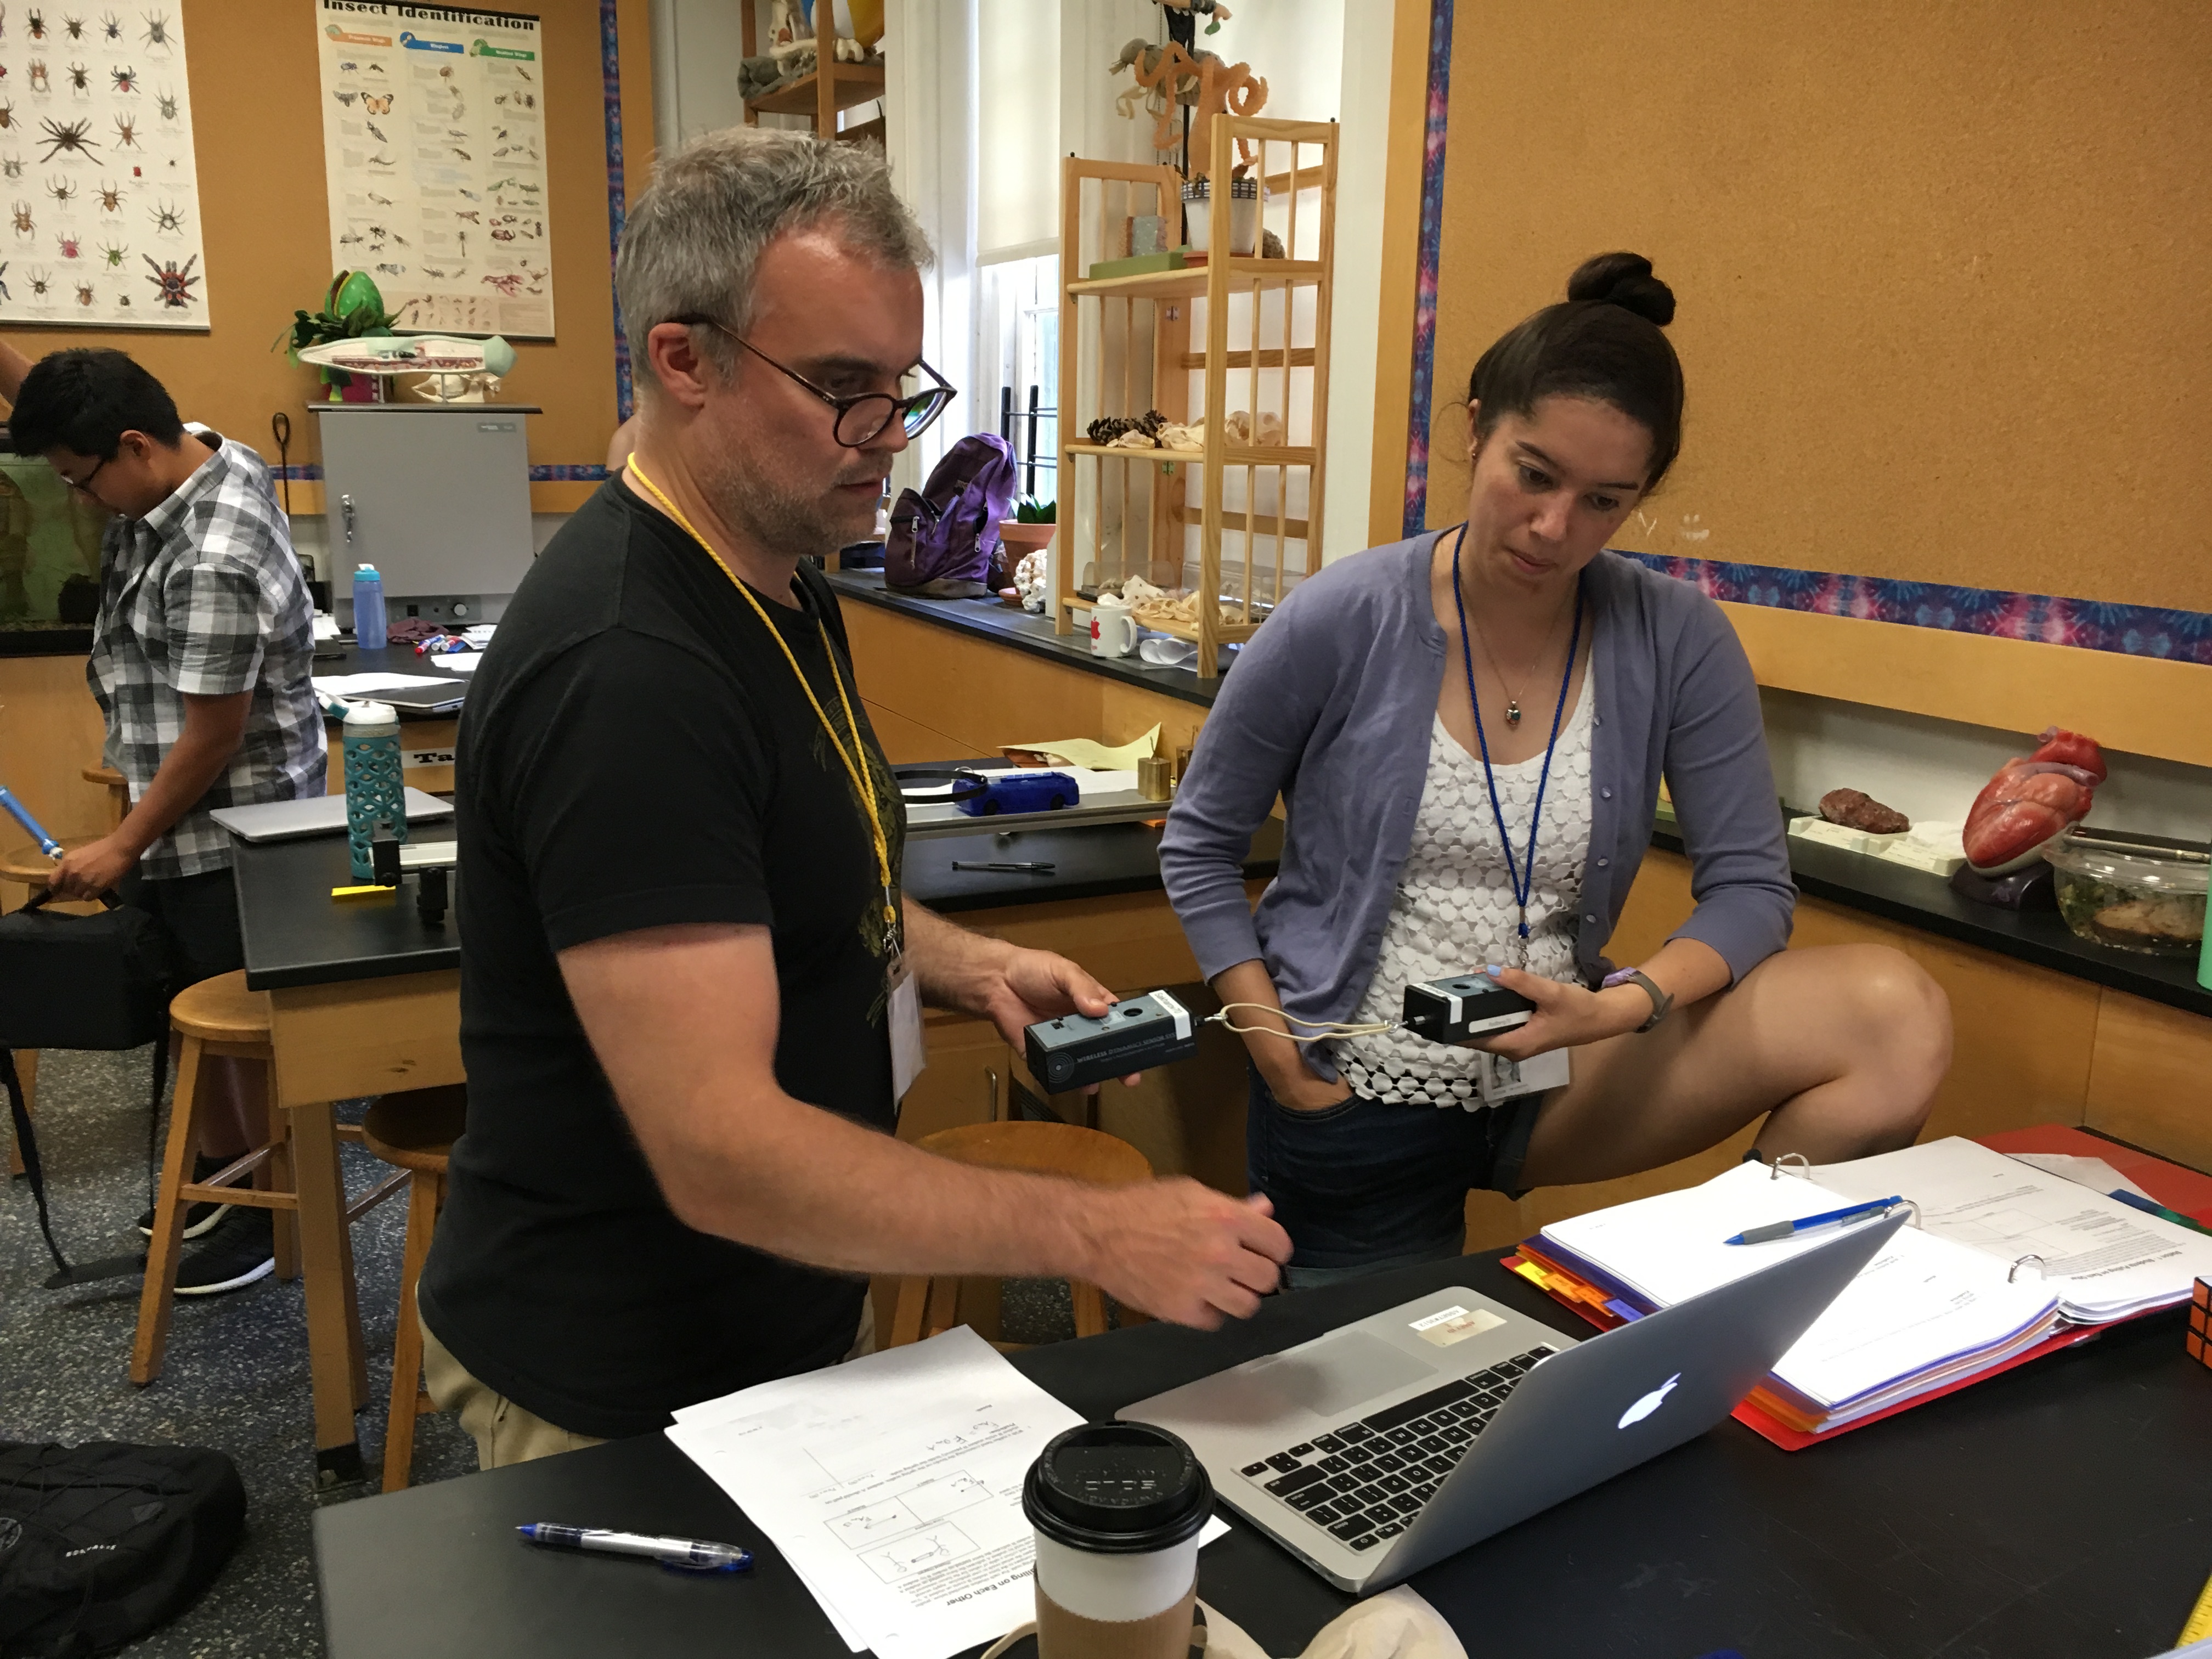 Video Analysis in the Physics and Chemistry Classroom: Pivot Interactives and the NGSS